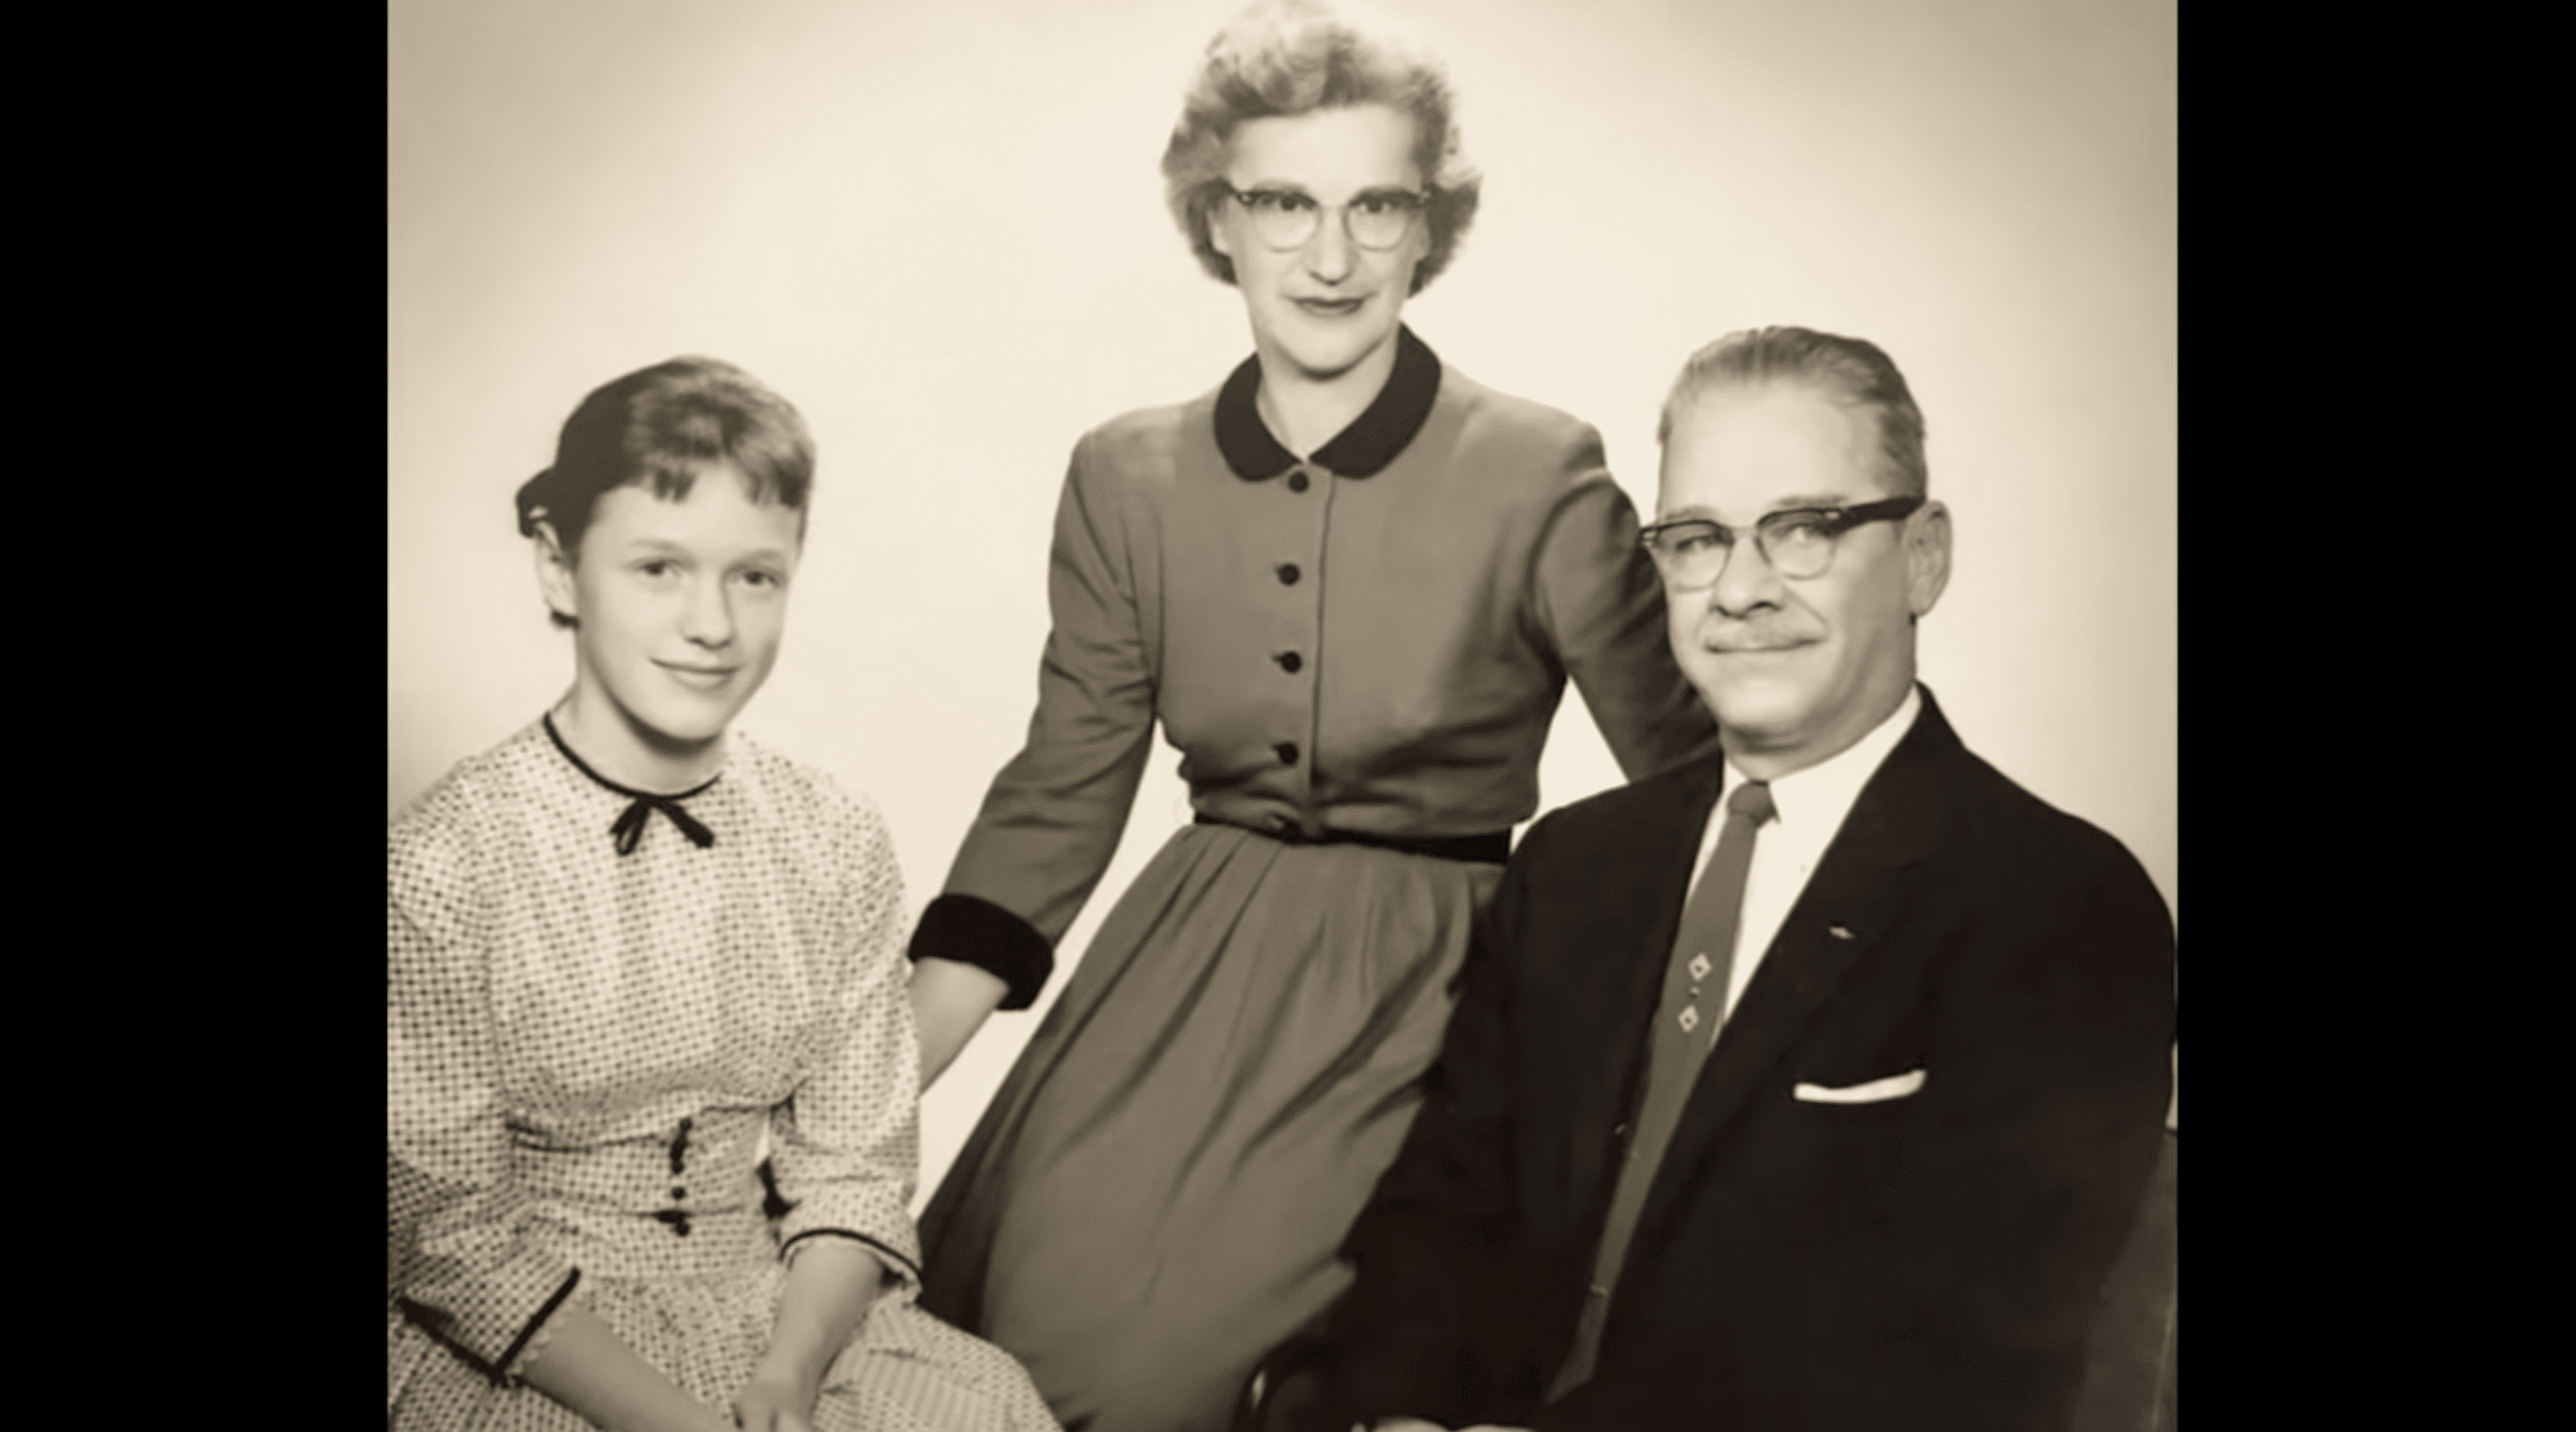 A young Suzan Baekkelund with her adoptive parents. | Source: YouTube.com/ABCNews